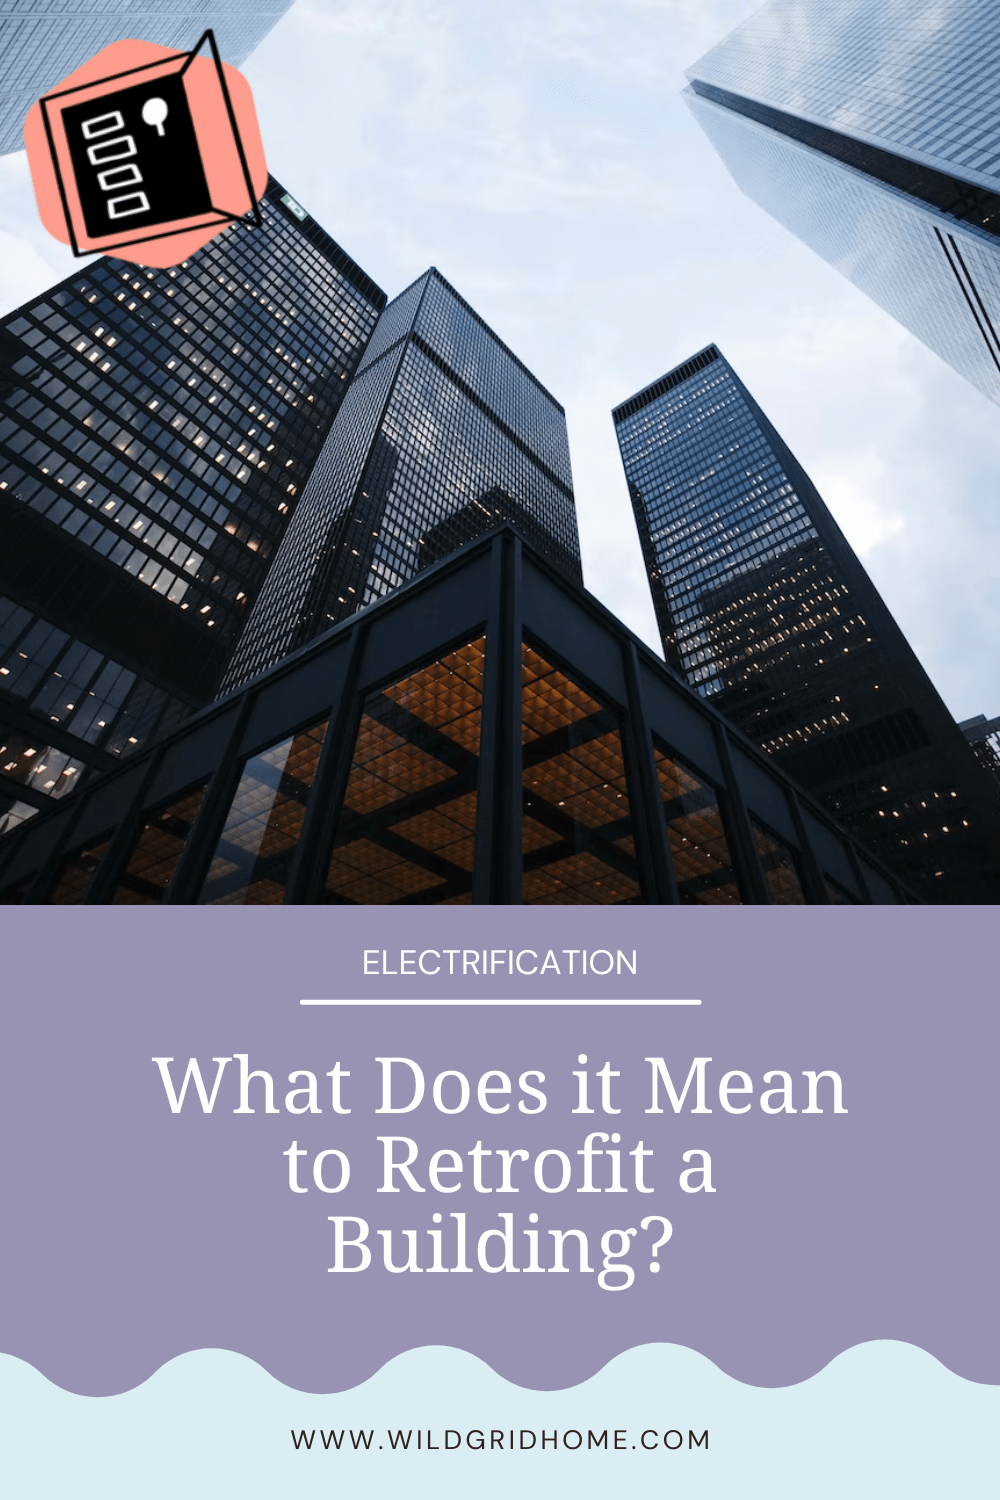 What Does it mean to Retrofit a Building? - Wildgrid Home